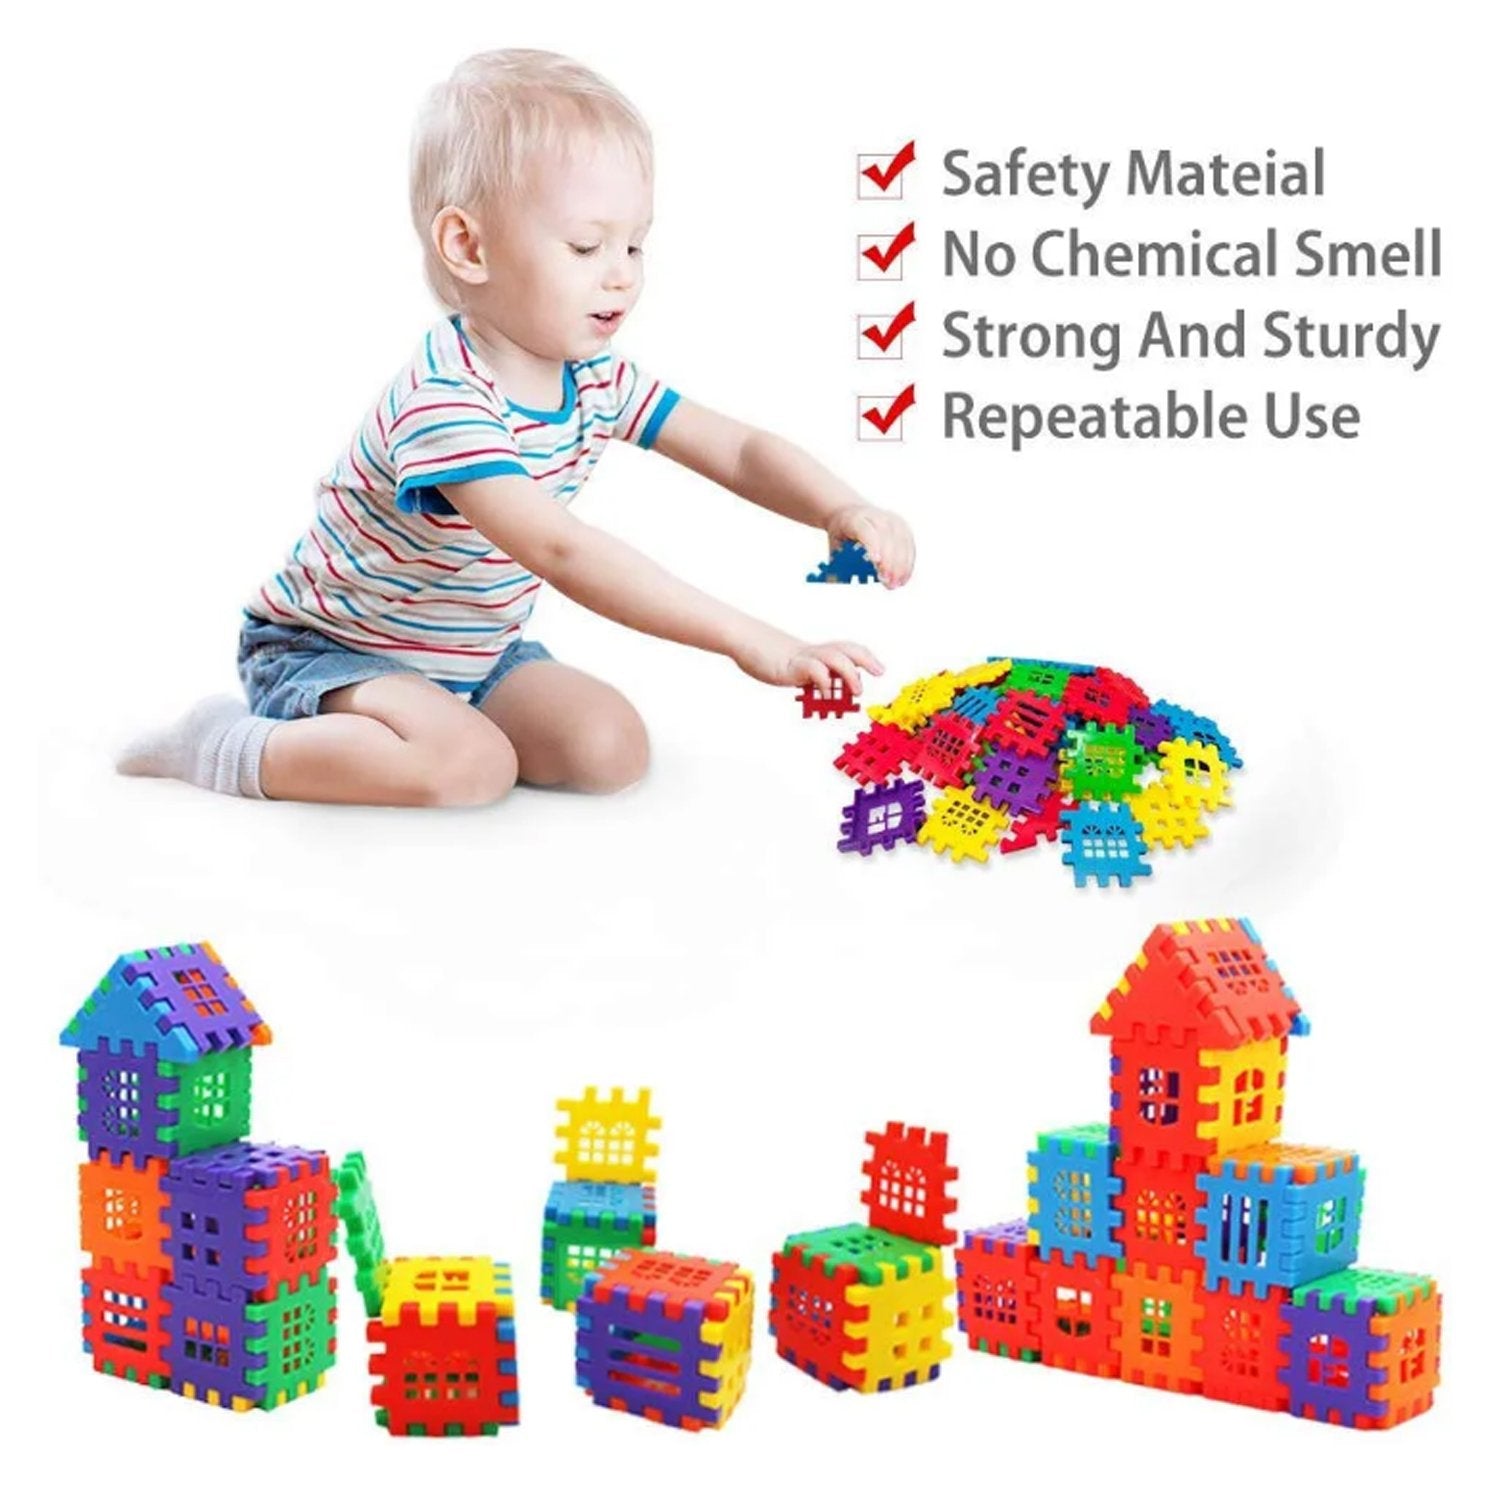 3911 200 Pc House Blocks Toy used in all kinds of household and official places specially for kids and children for their playing and enjoying purposes. DeoDap